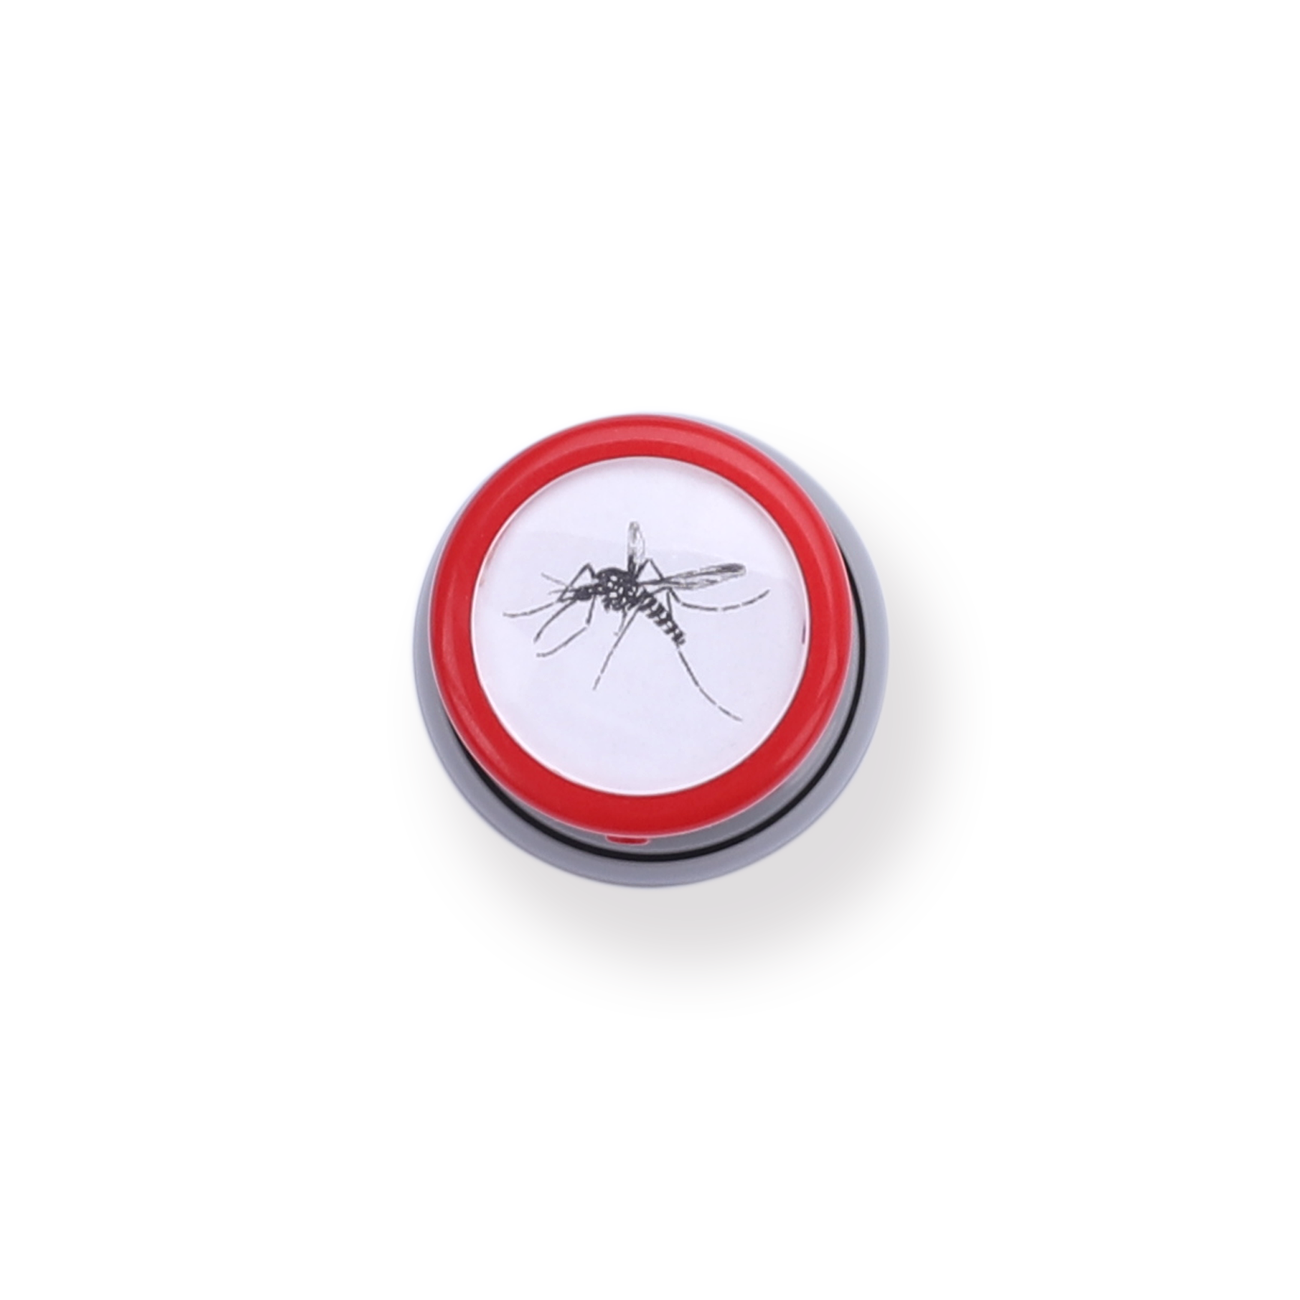 Alive Mosquito Pattern Stamp - Red